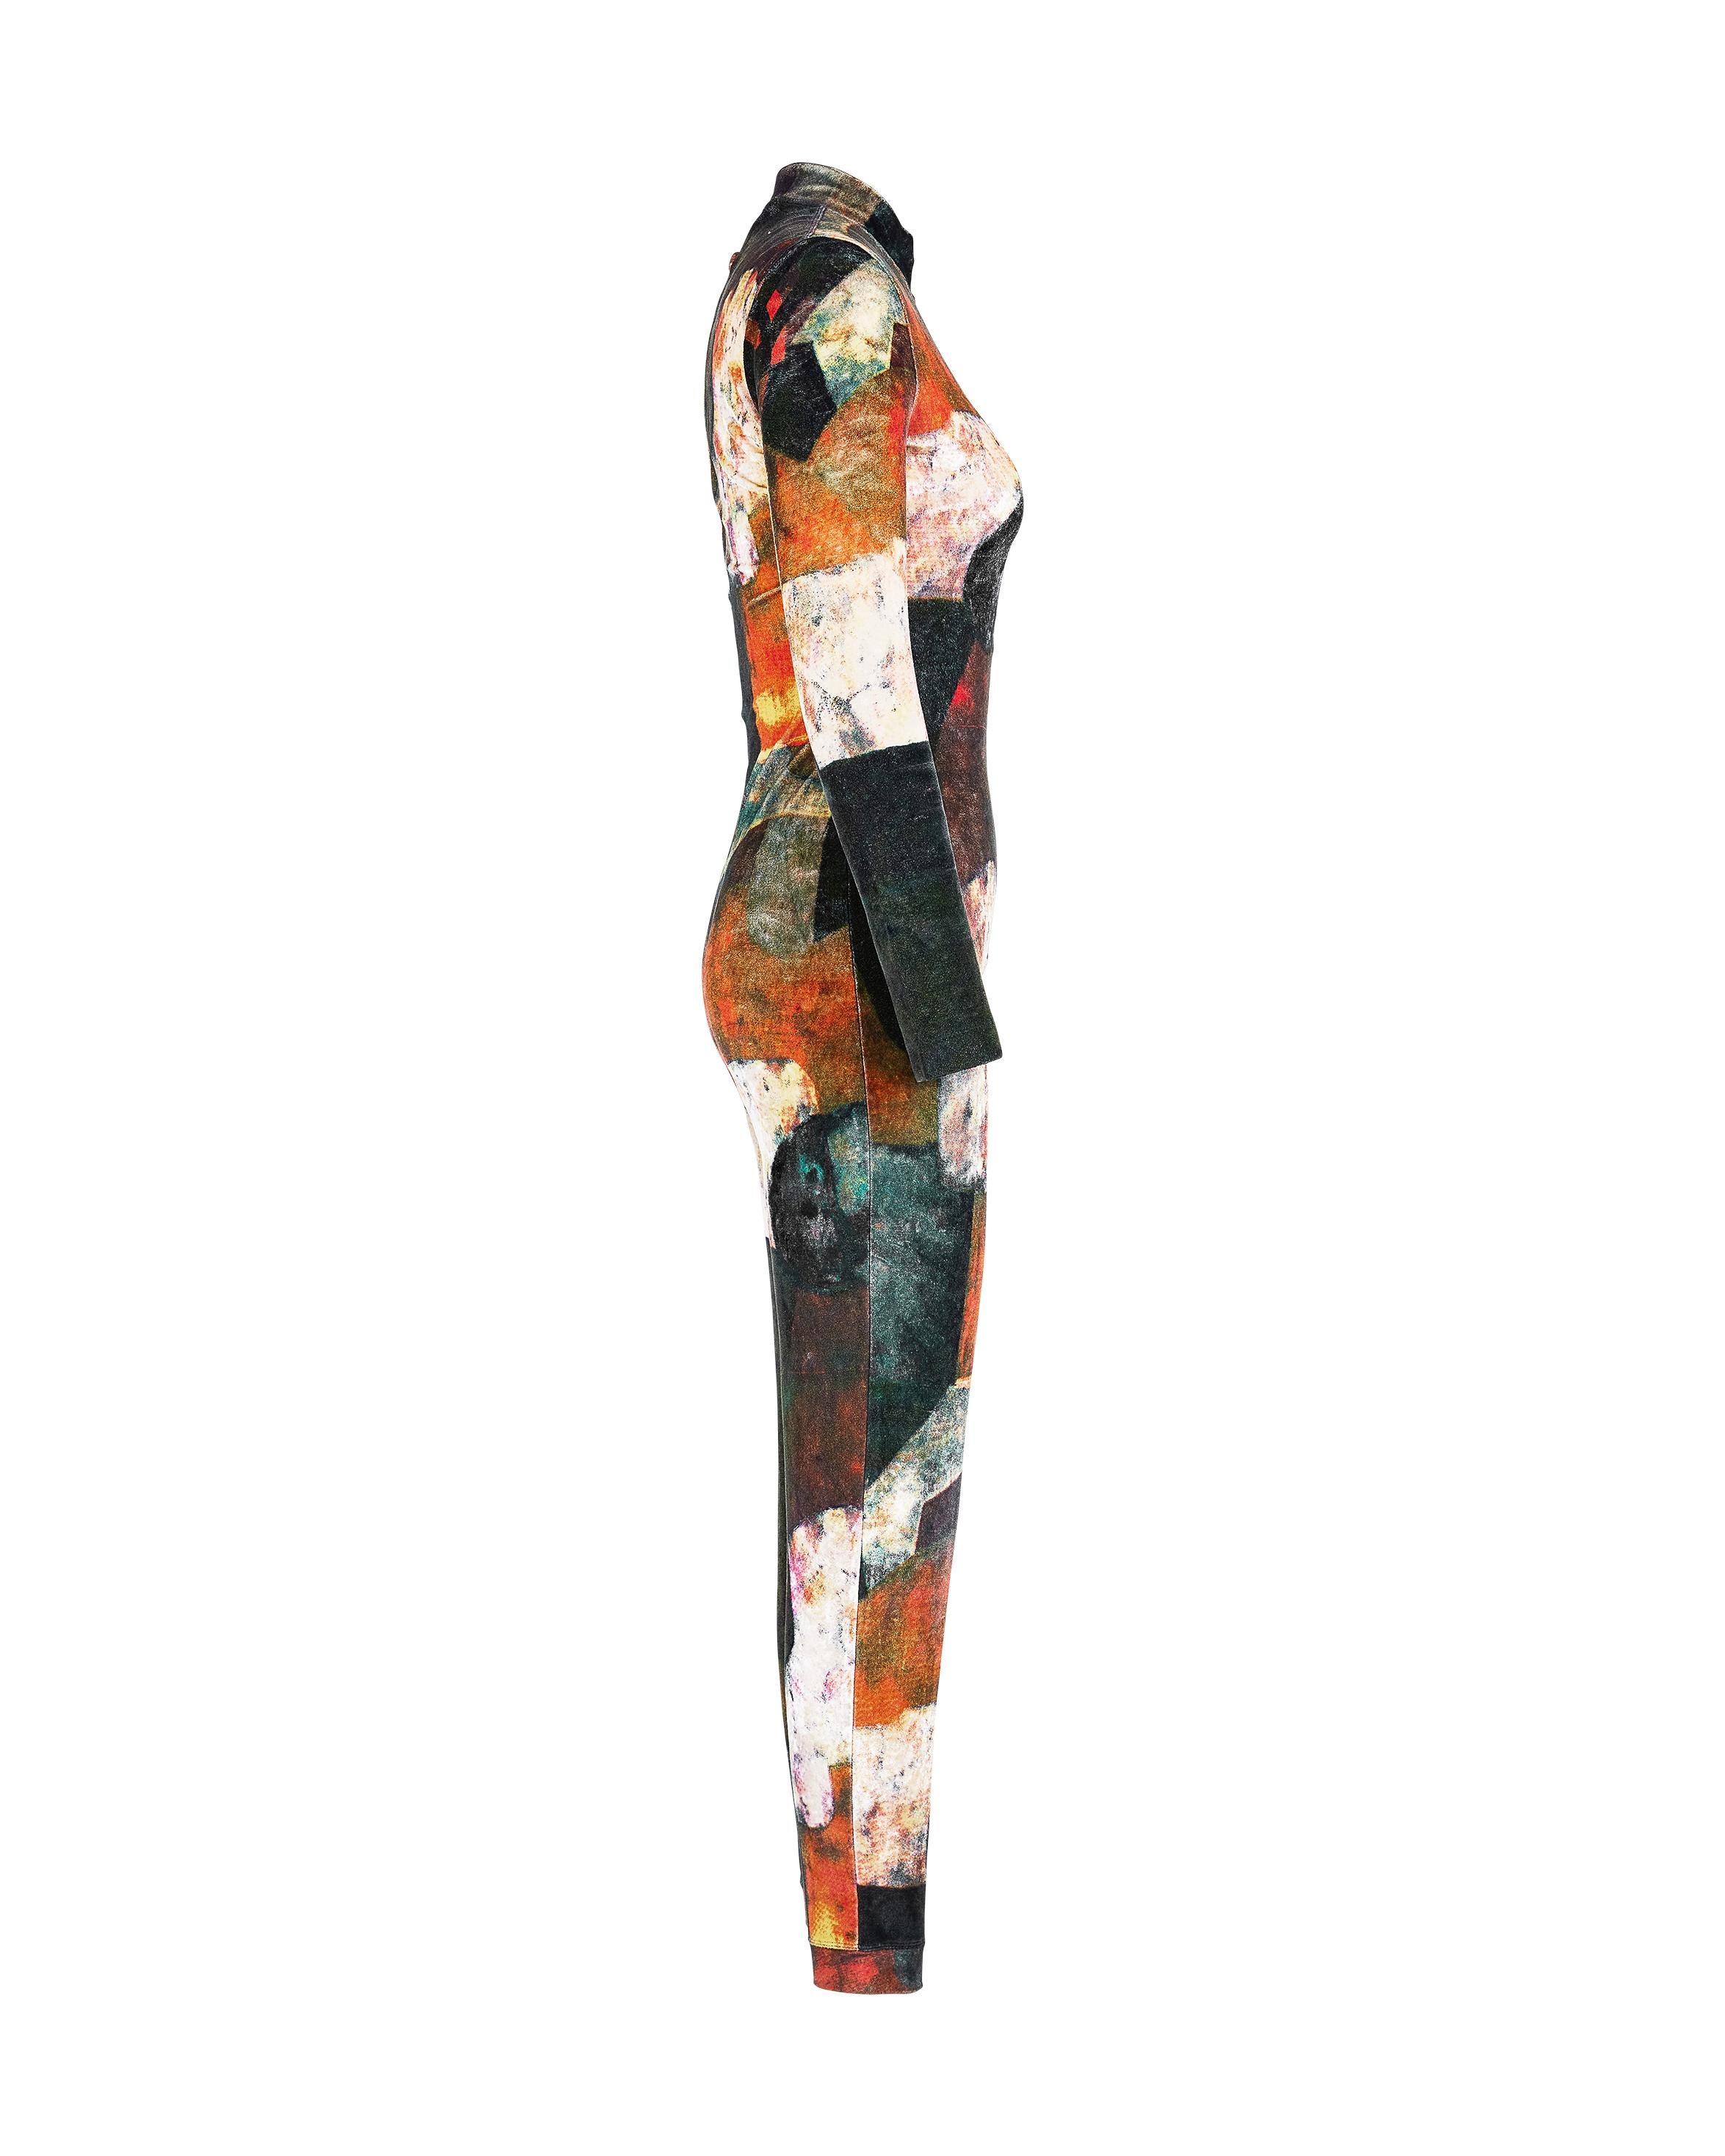 1980's Jean Paul Gaultier 'Maille' Robert Delaunay printed zip-up jumpsuit/catsuit. Rare 1980's Gaultier piece featuring print by artist Robert Delaunay. Half-zip mock neck catsuit with abstract print throughout. Moderately stretchy material; feels